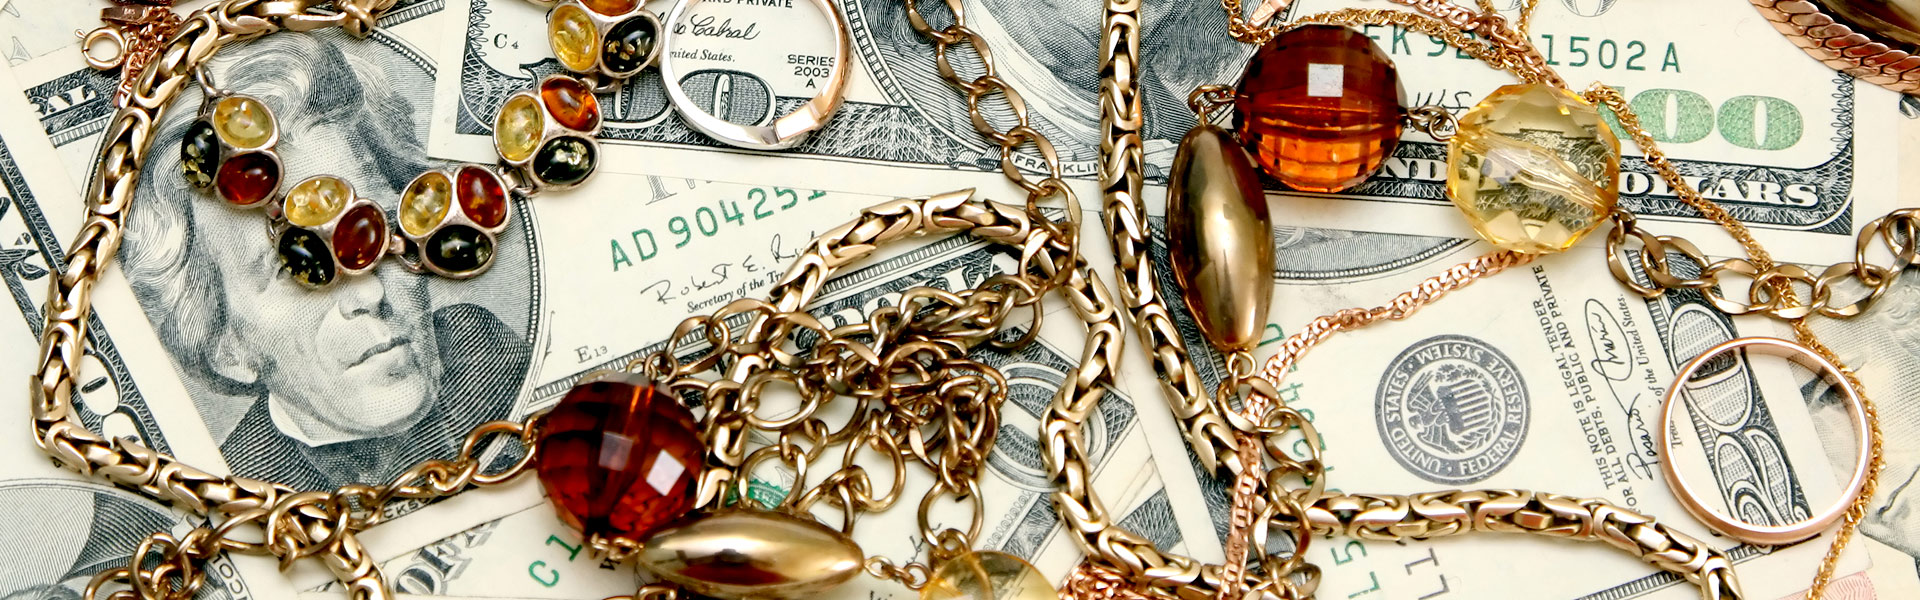 Collection of Dollar Bills and Jewelry